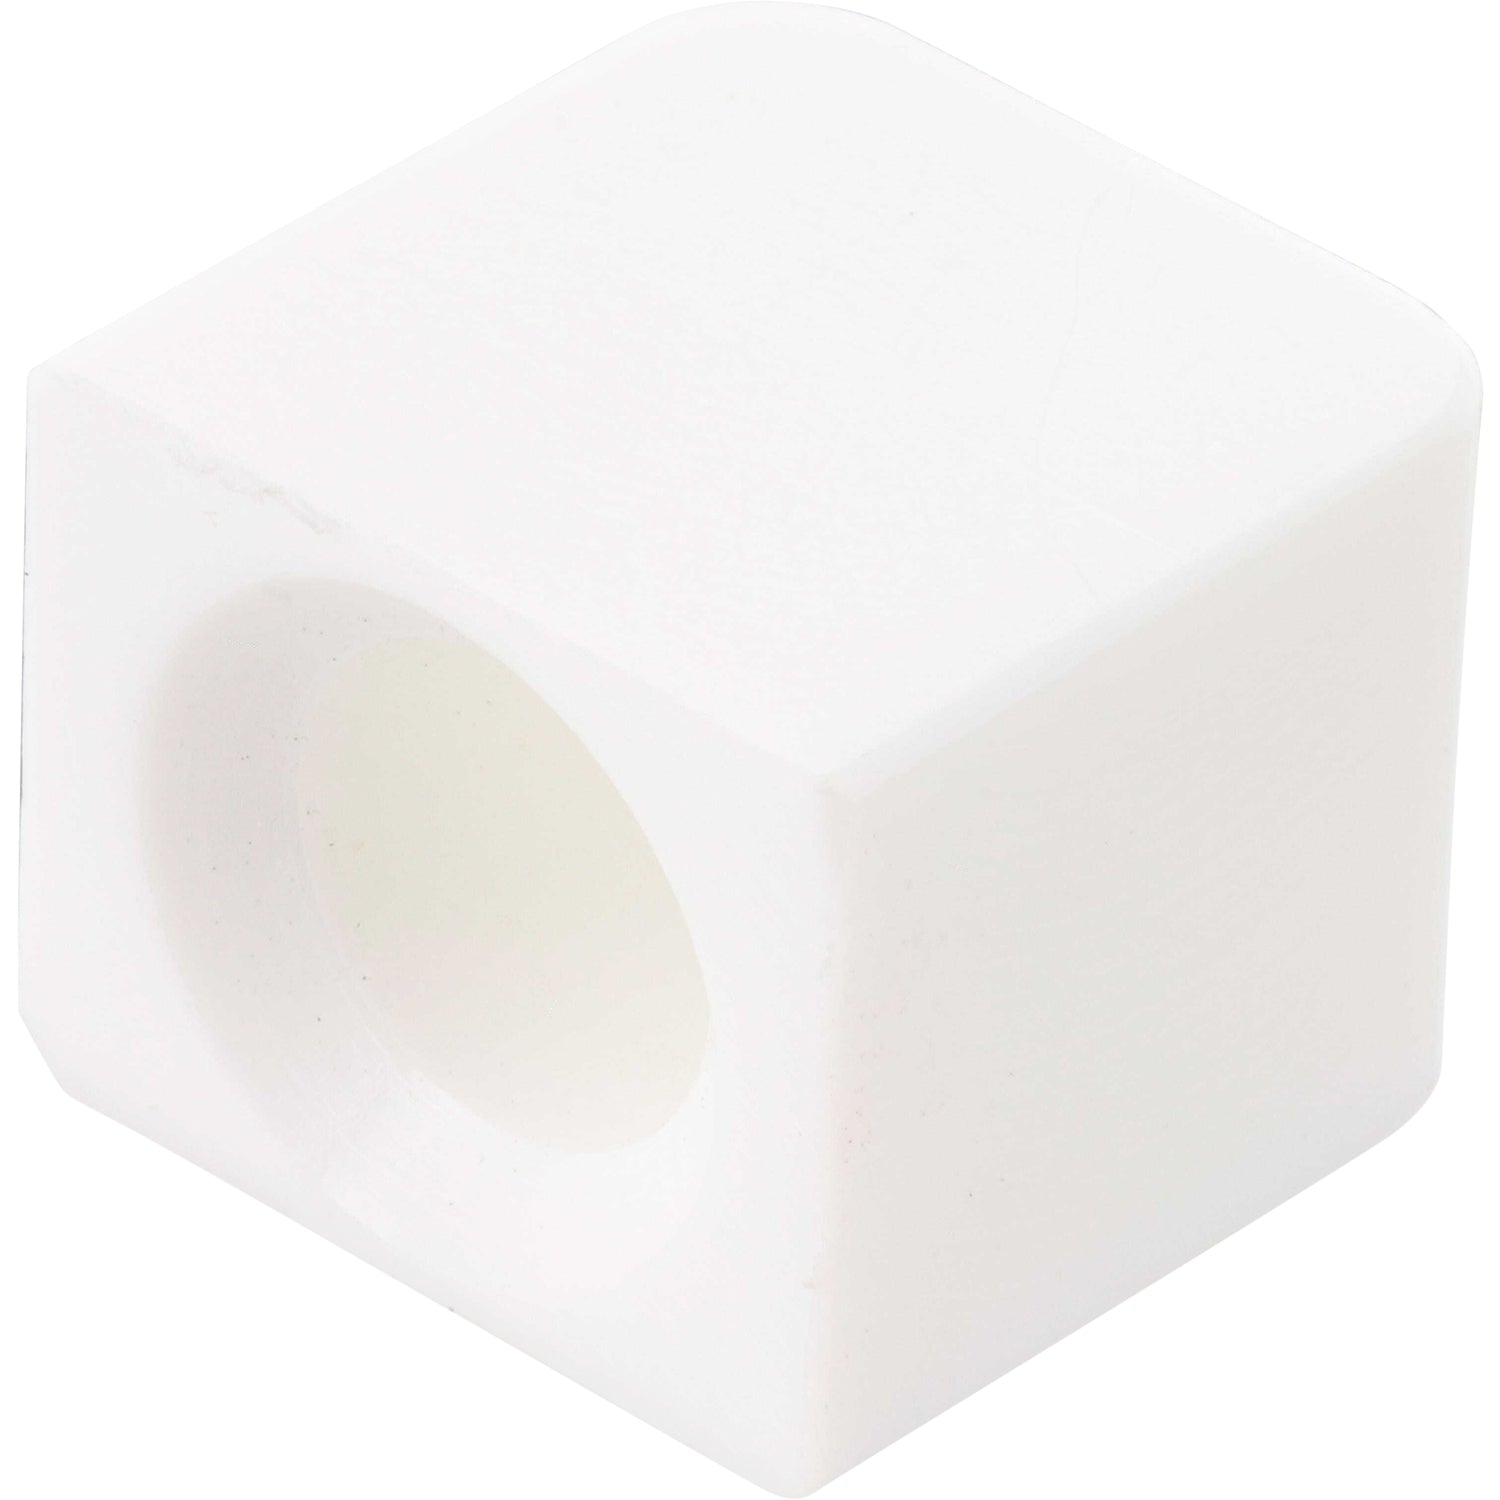 White plastic cube shaped part with center hole shown on white background. 